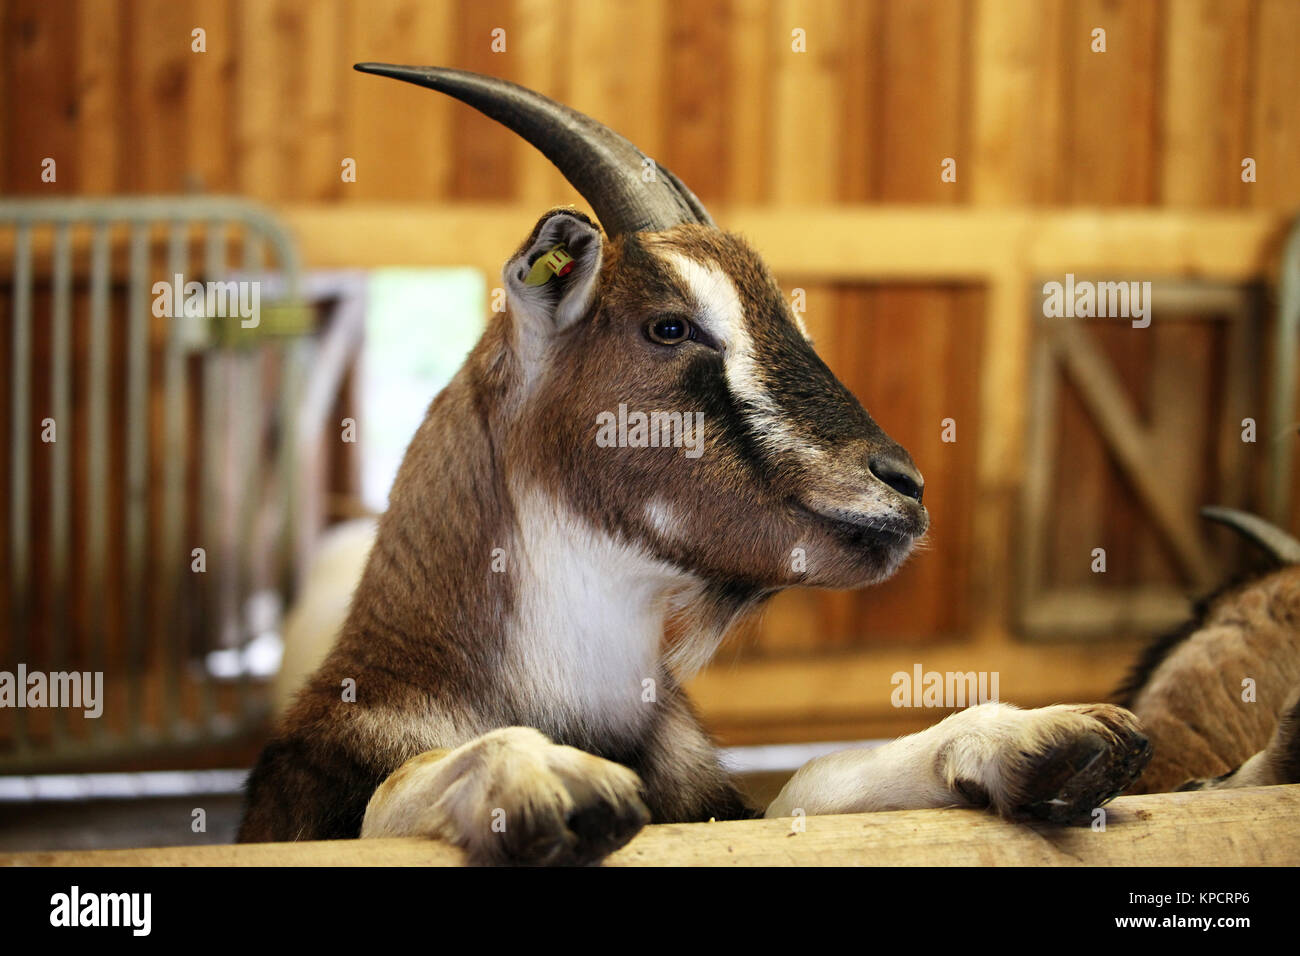 Goat in a stable Stock Photo